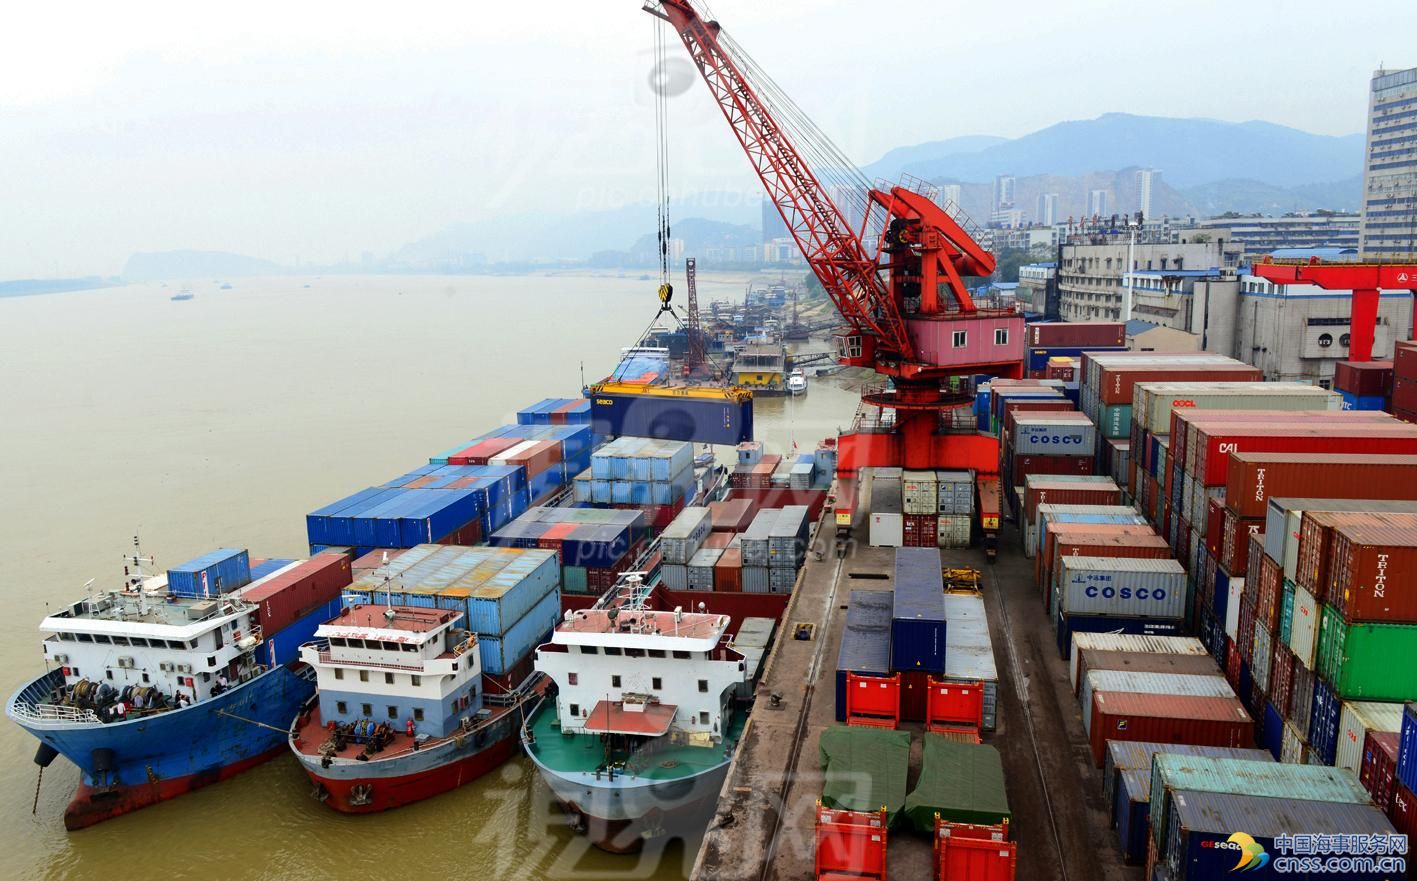 Korean Register boosts operational efficiency with containership conversion